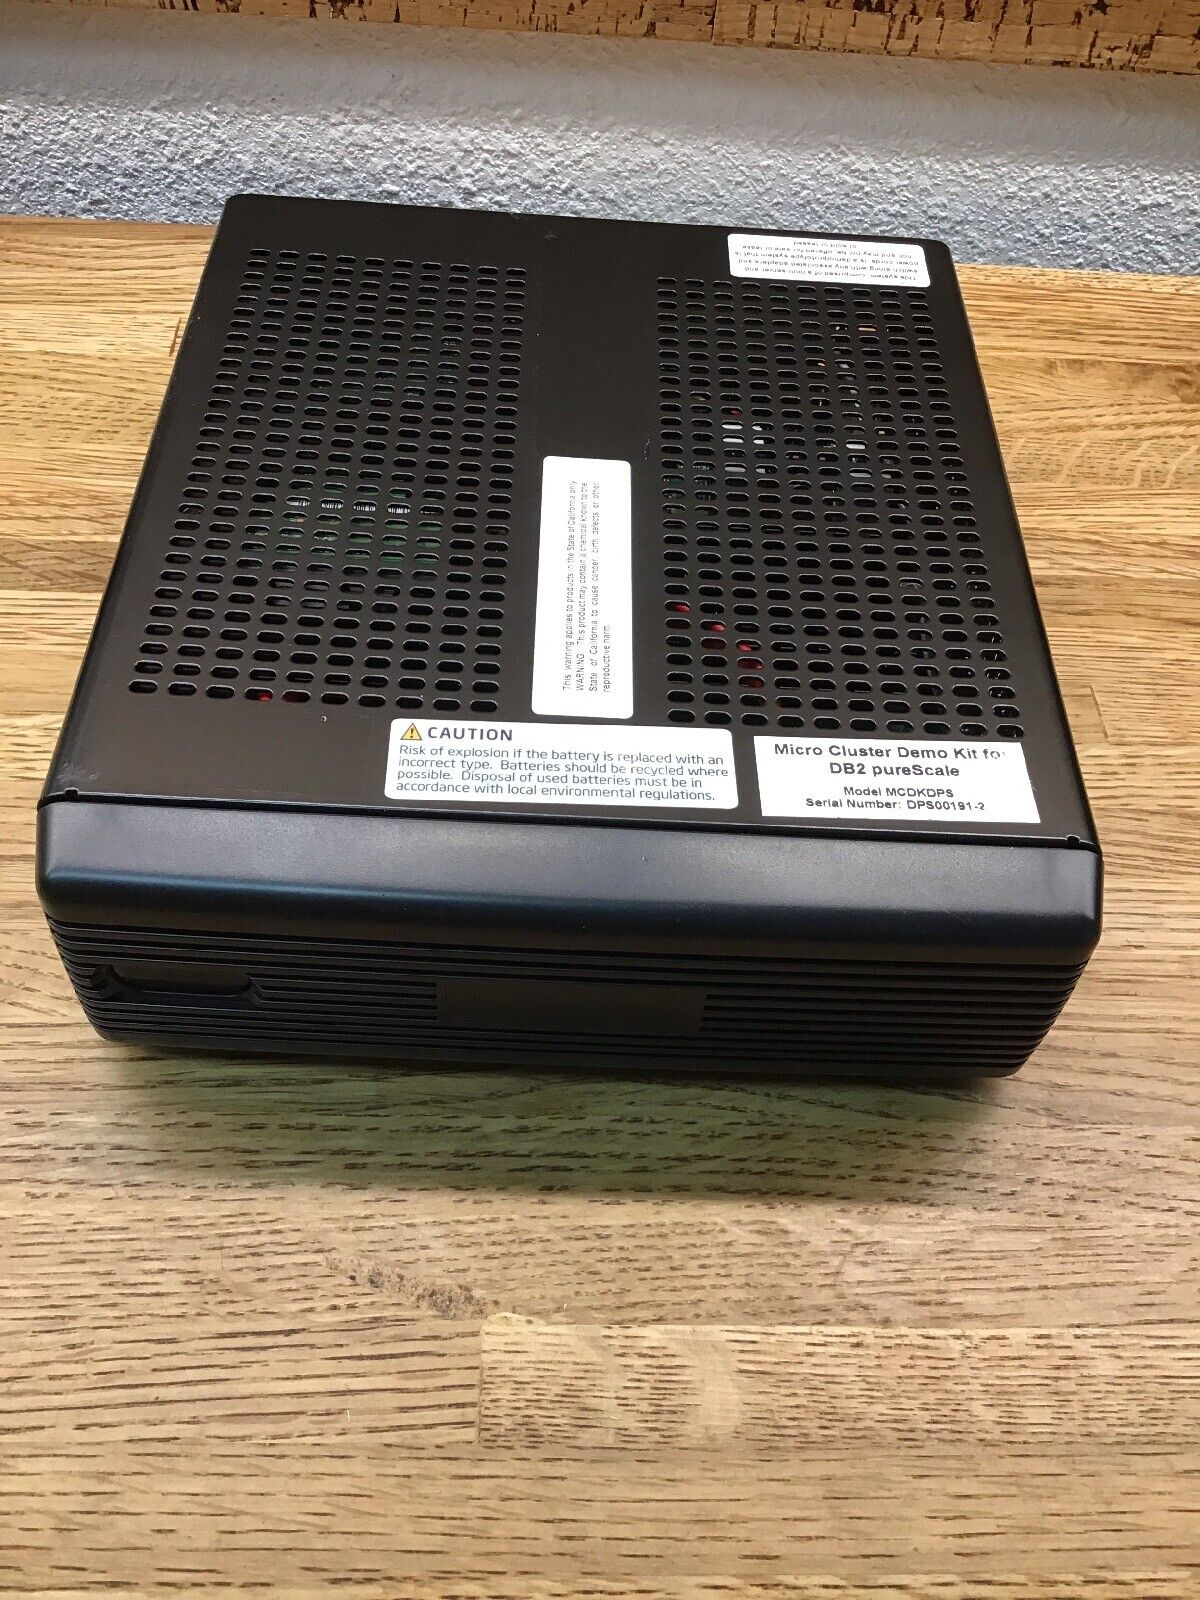 IBM Micro Cluster Demo Kit For DB2 Purescale - PROTOTYPE DD2